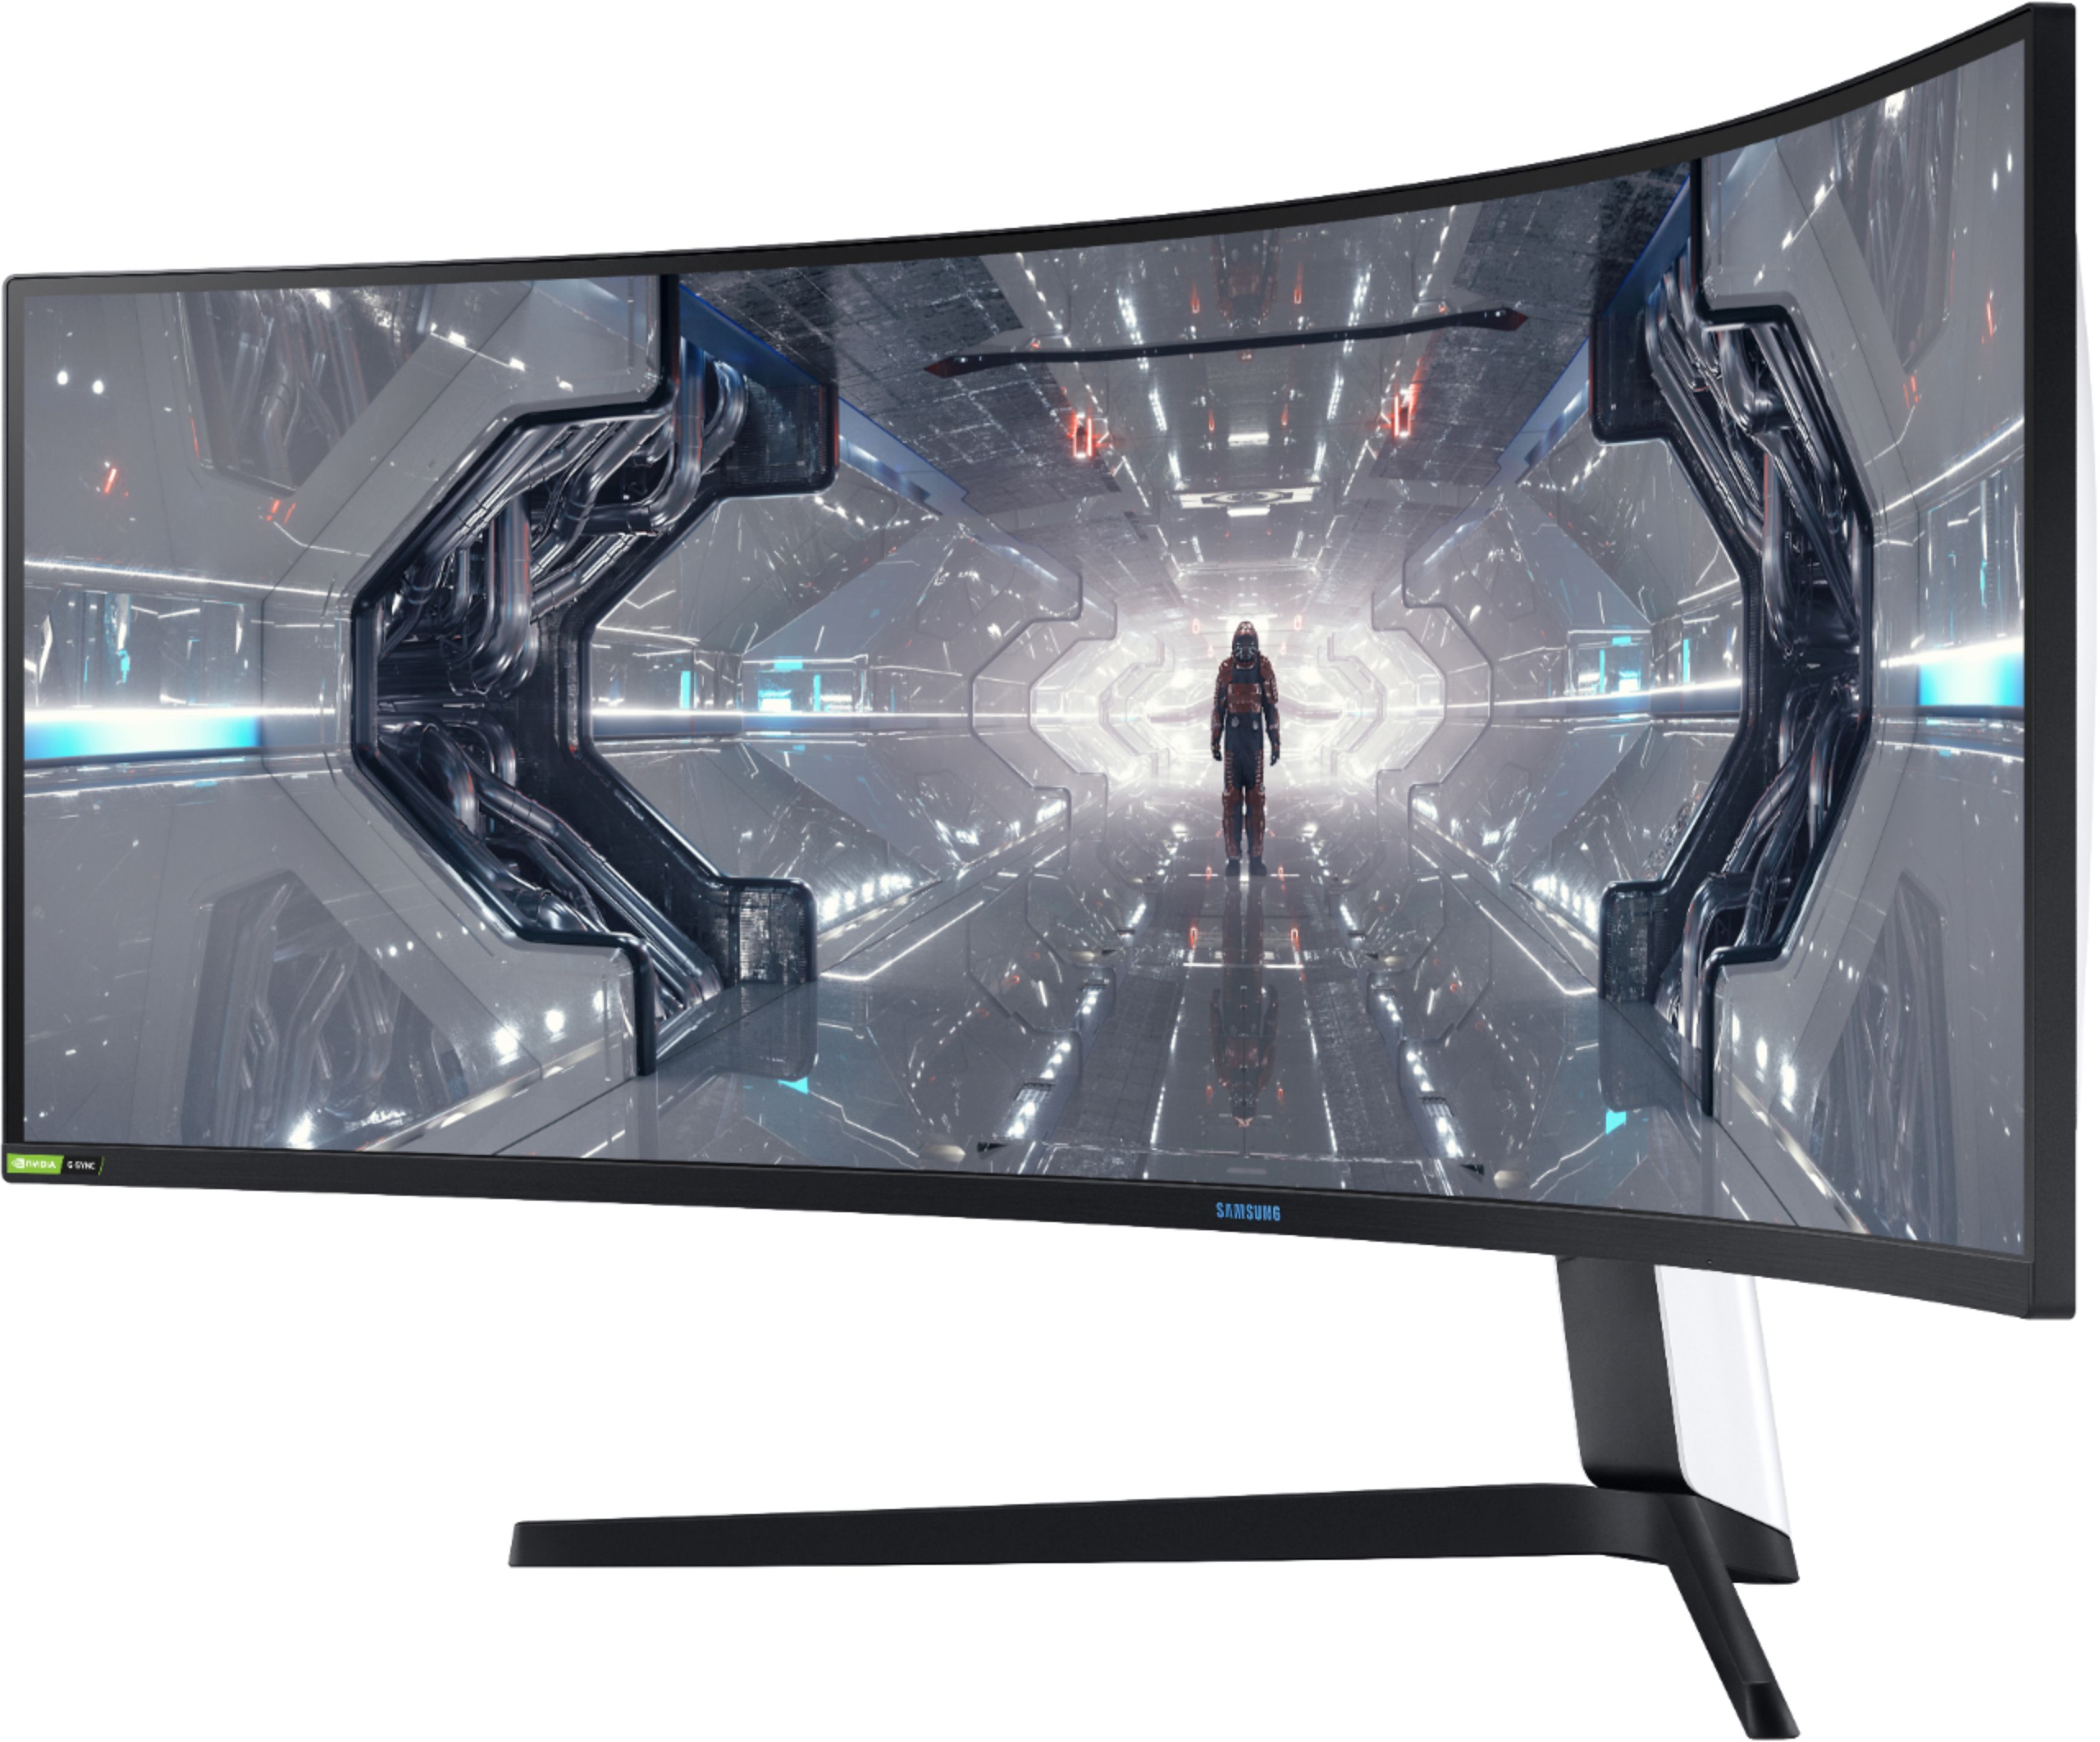 Select Samsung Odyssey Gaming Monitors Are Discounted by Up to $450 - CNET